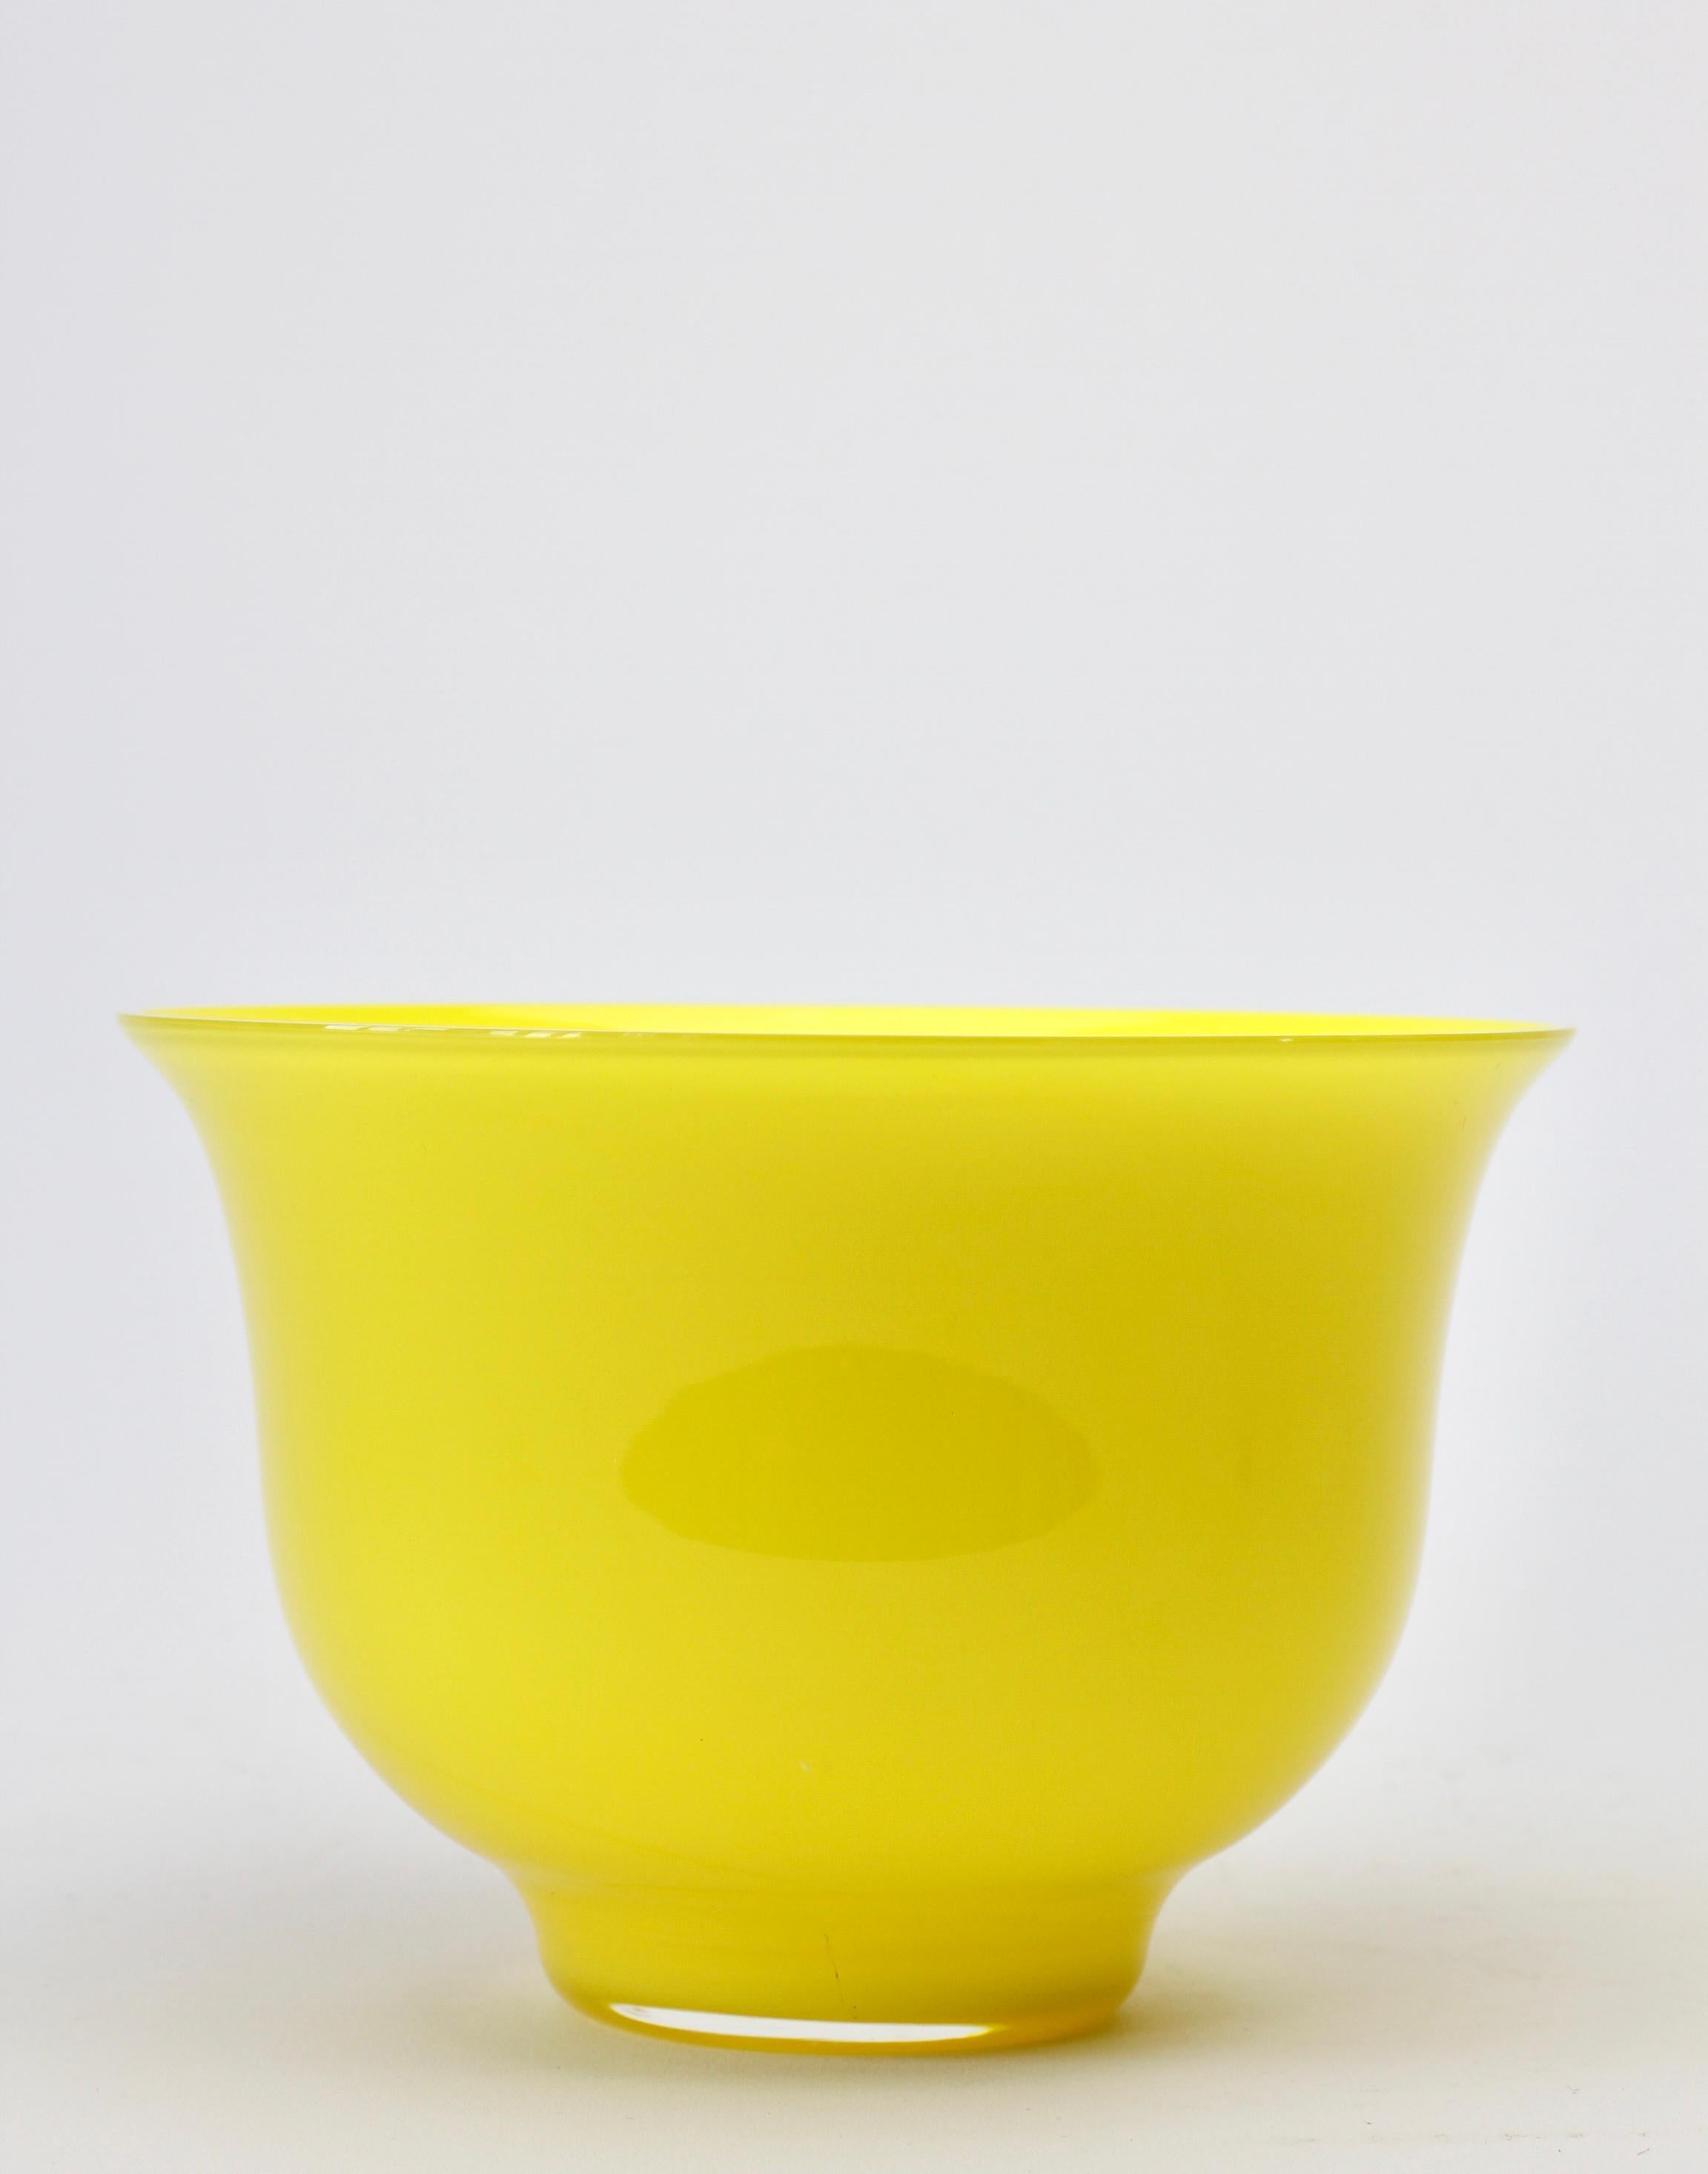 Midcentury vintage Cenedese Vetri of Murano, Italy. Particularly striking is the vessel's elegant form and yellow color (color).

We have a full range of Murano glass from Cenedese, including bowls, vases, vessels and ashtrays, in various colors